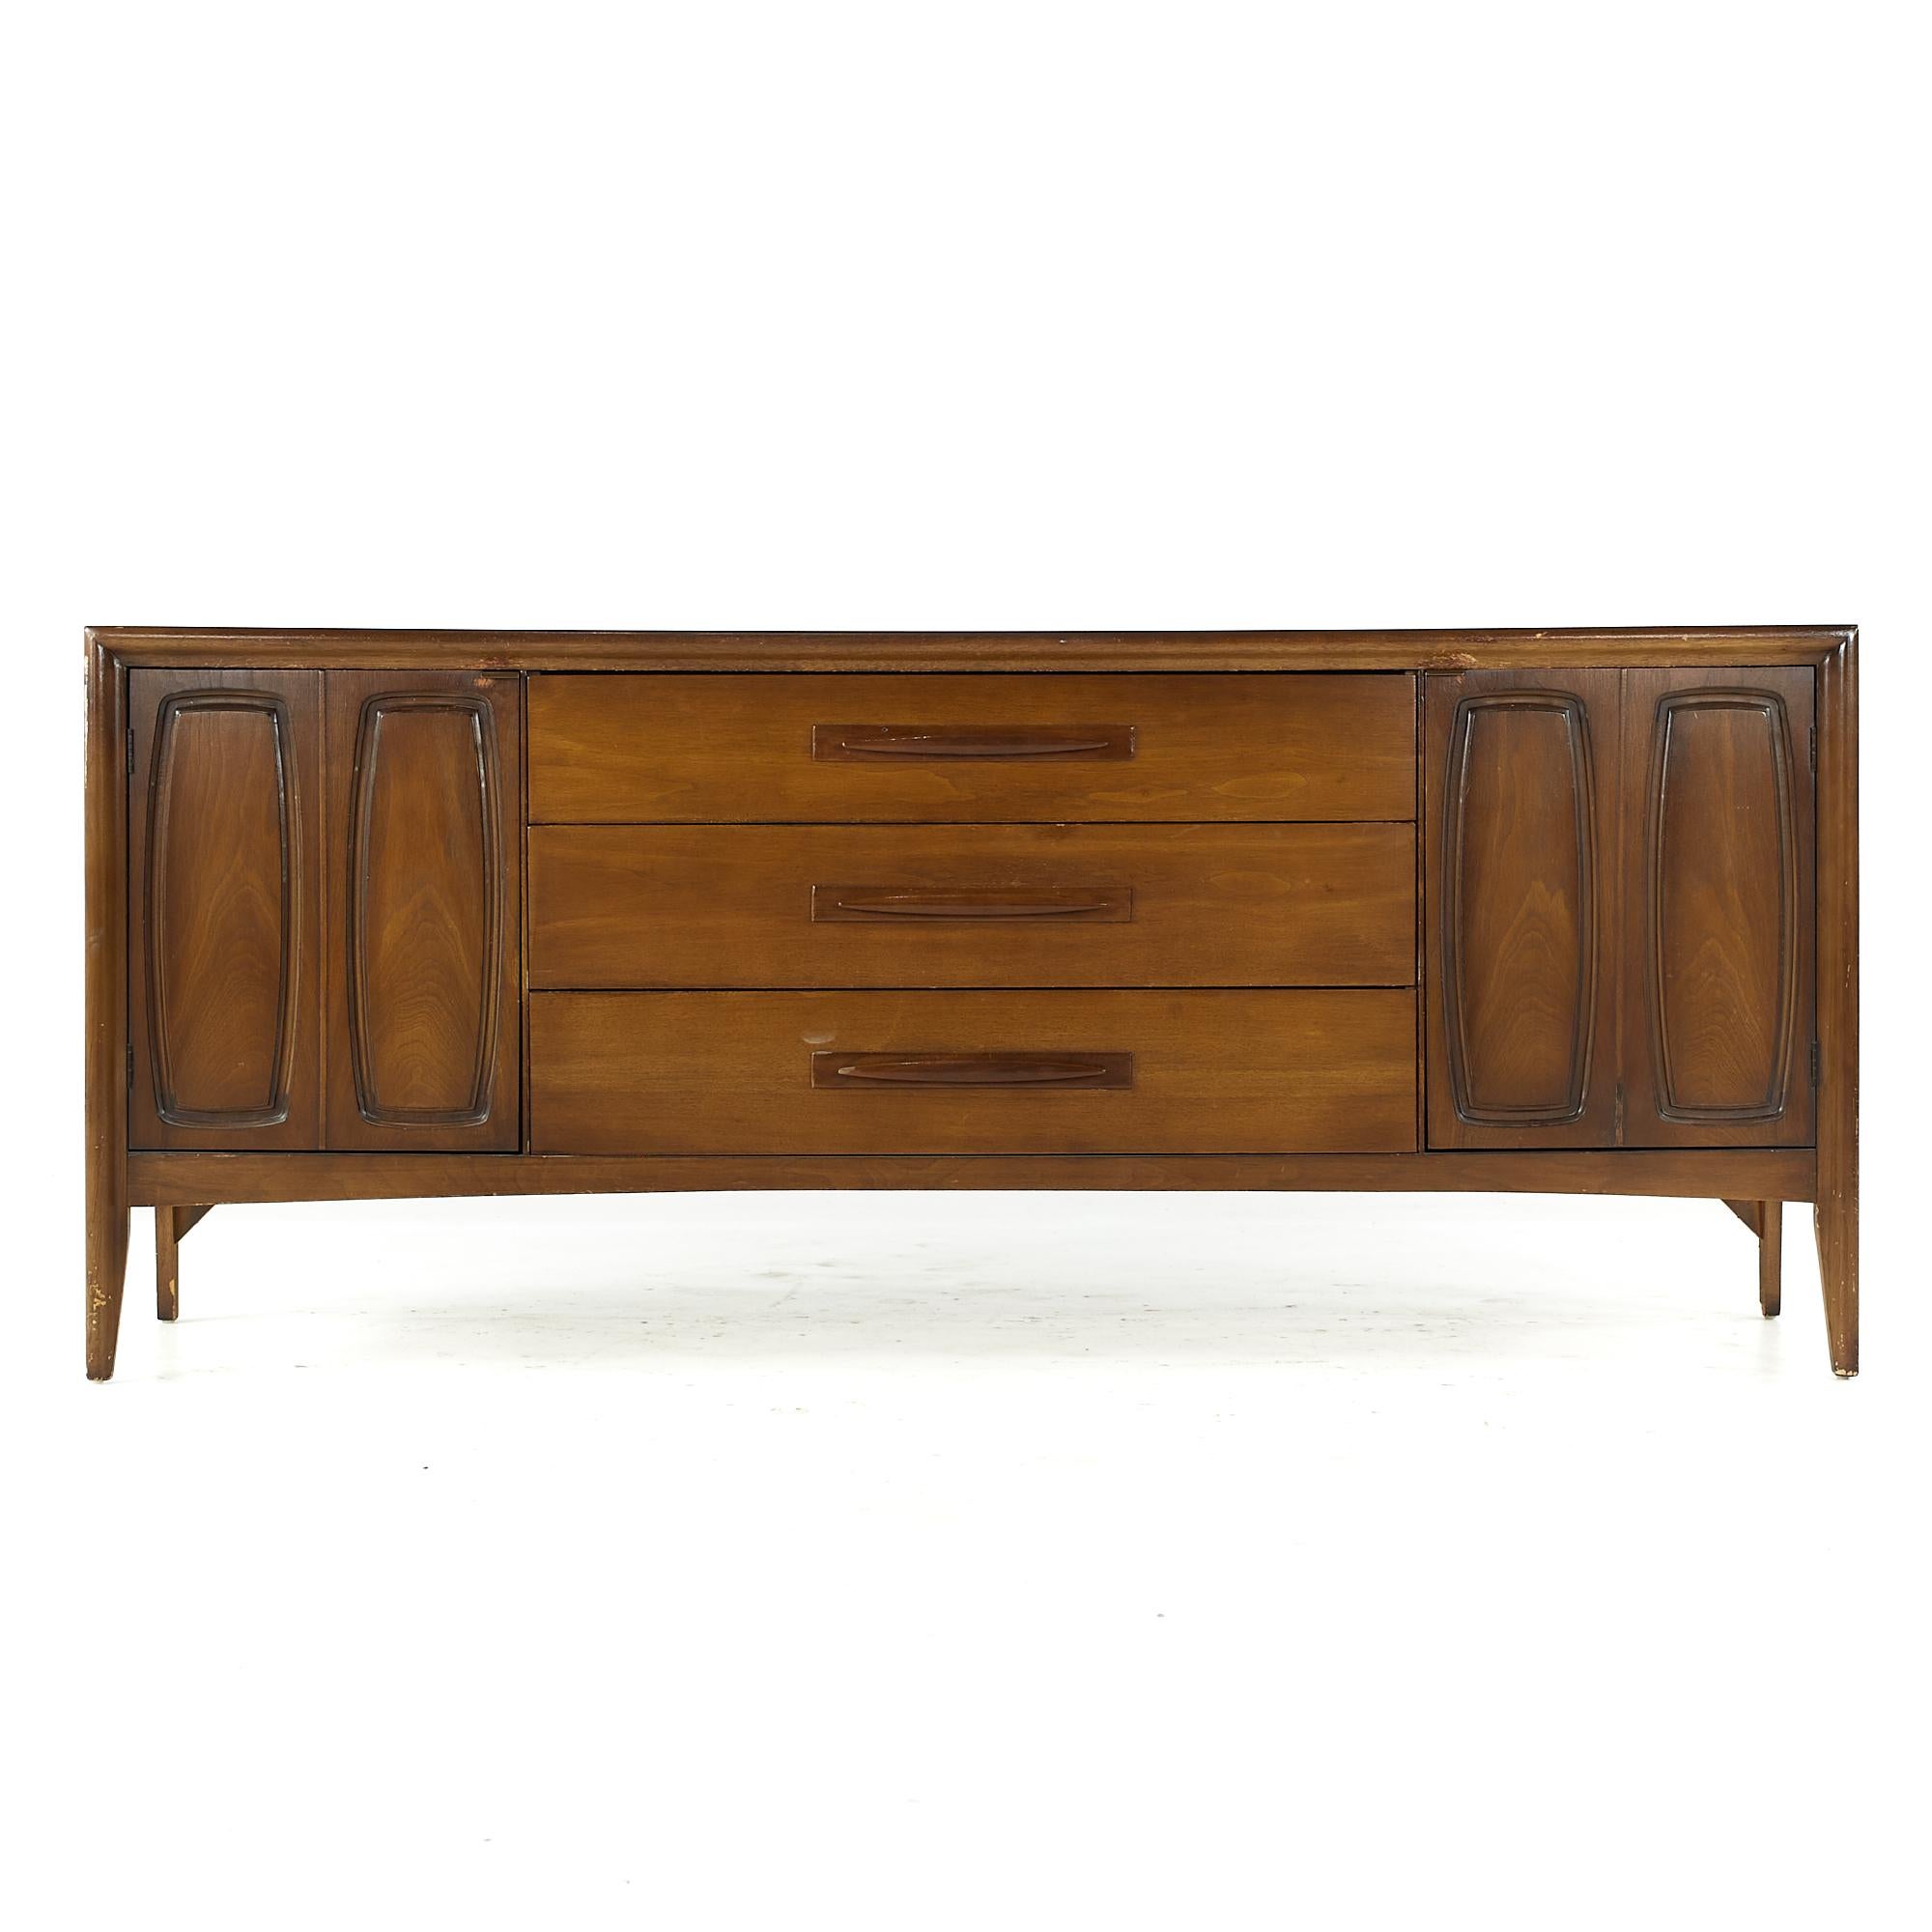 Broyhill Emphasis midcentury walnut lowboy dresser

This lowboy measures: 72 wide x 19 deep x 31 inches high

All pieces of furniture can be had in what we call restored vintage condition. That means the piece is restored upon purchase so it’s